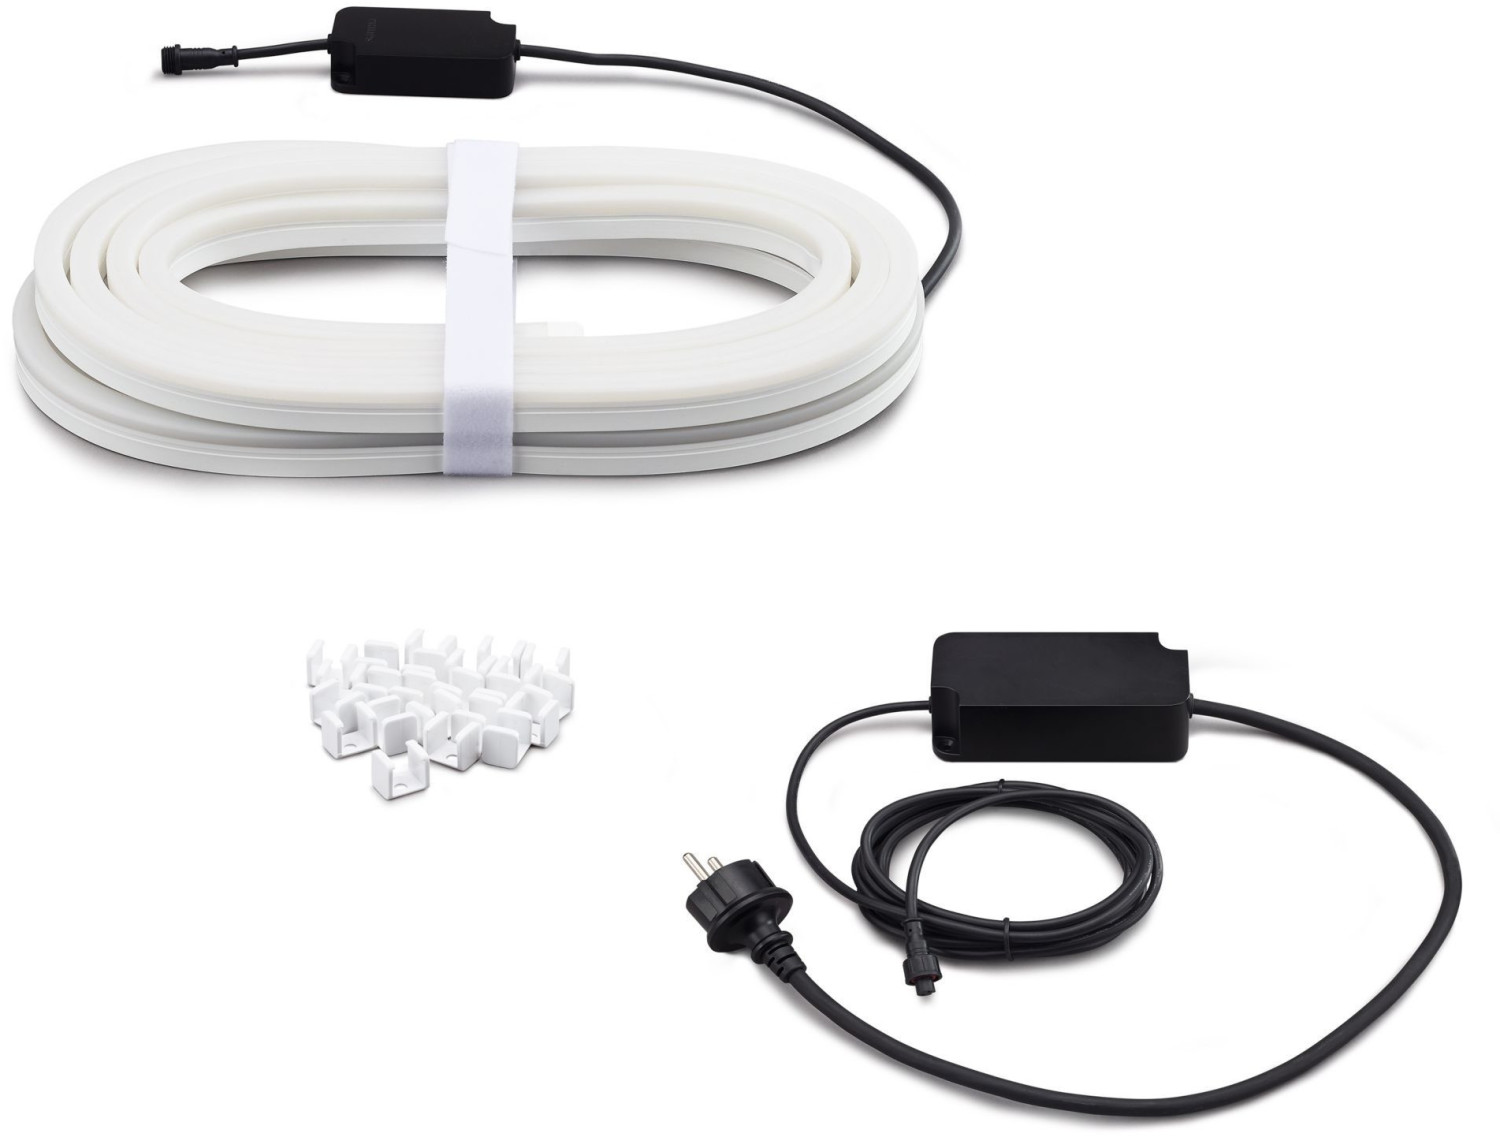 Philips Hue LED-Band Outdoor (Länge: 5 m, Lichtfarbe: RGBW, 37,5 W, 1.600  lm)